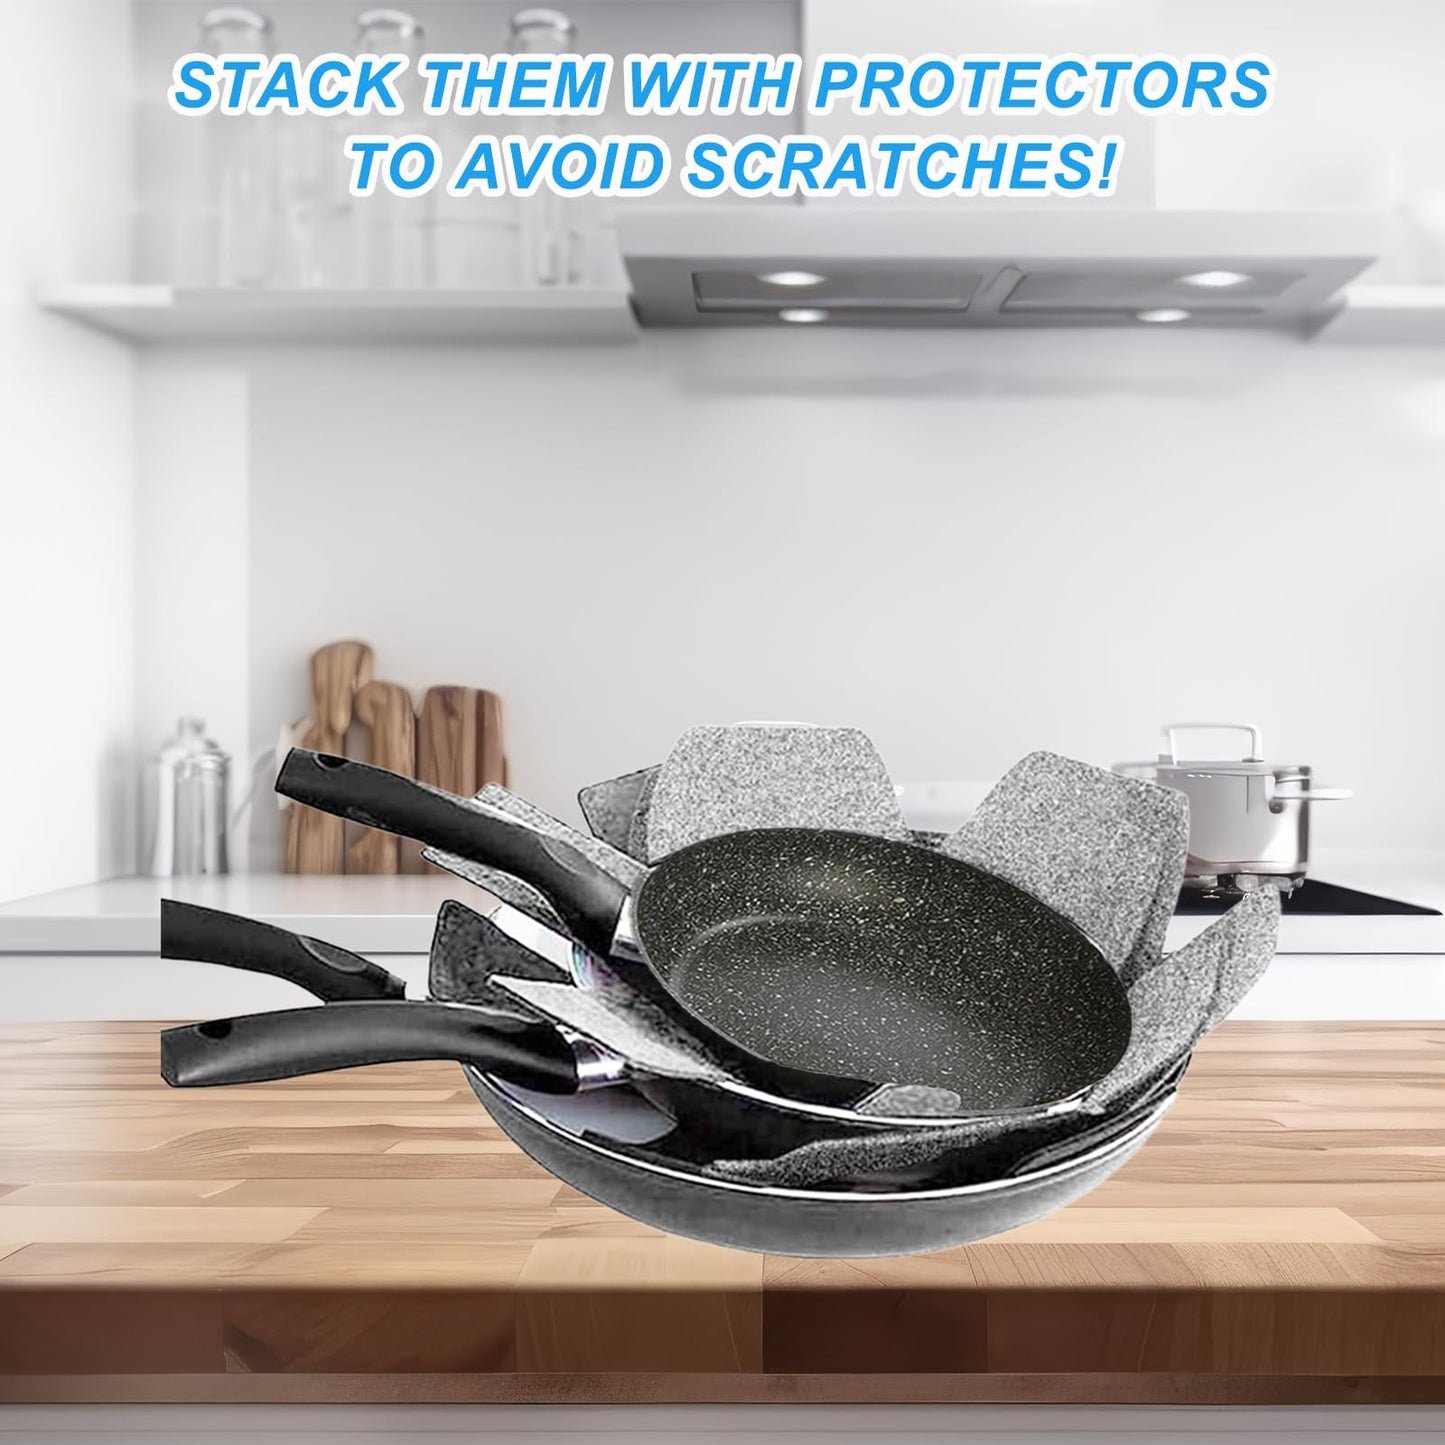 Pot and Pan Protectors, 12 Pack Pot Protectors in 3 Sizes, Pan Protectors for Stacking, Pan Separator/Pot Dividers to Avoid Stratching or Marring, Cookware Protector Set for Glass Ceramic Plates Bowls